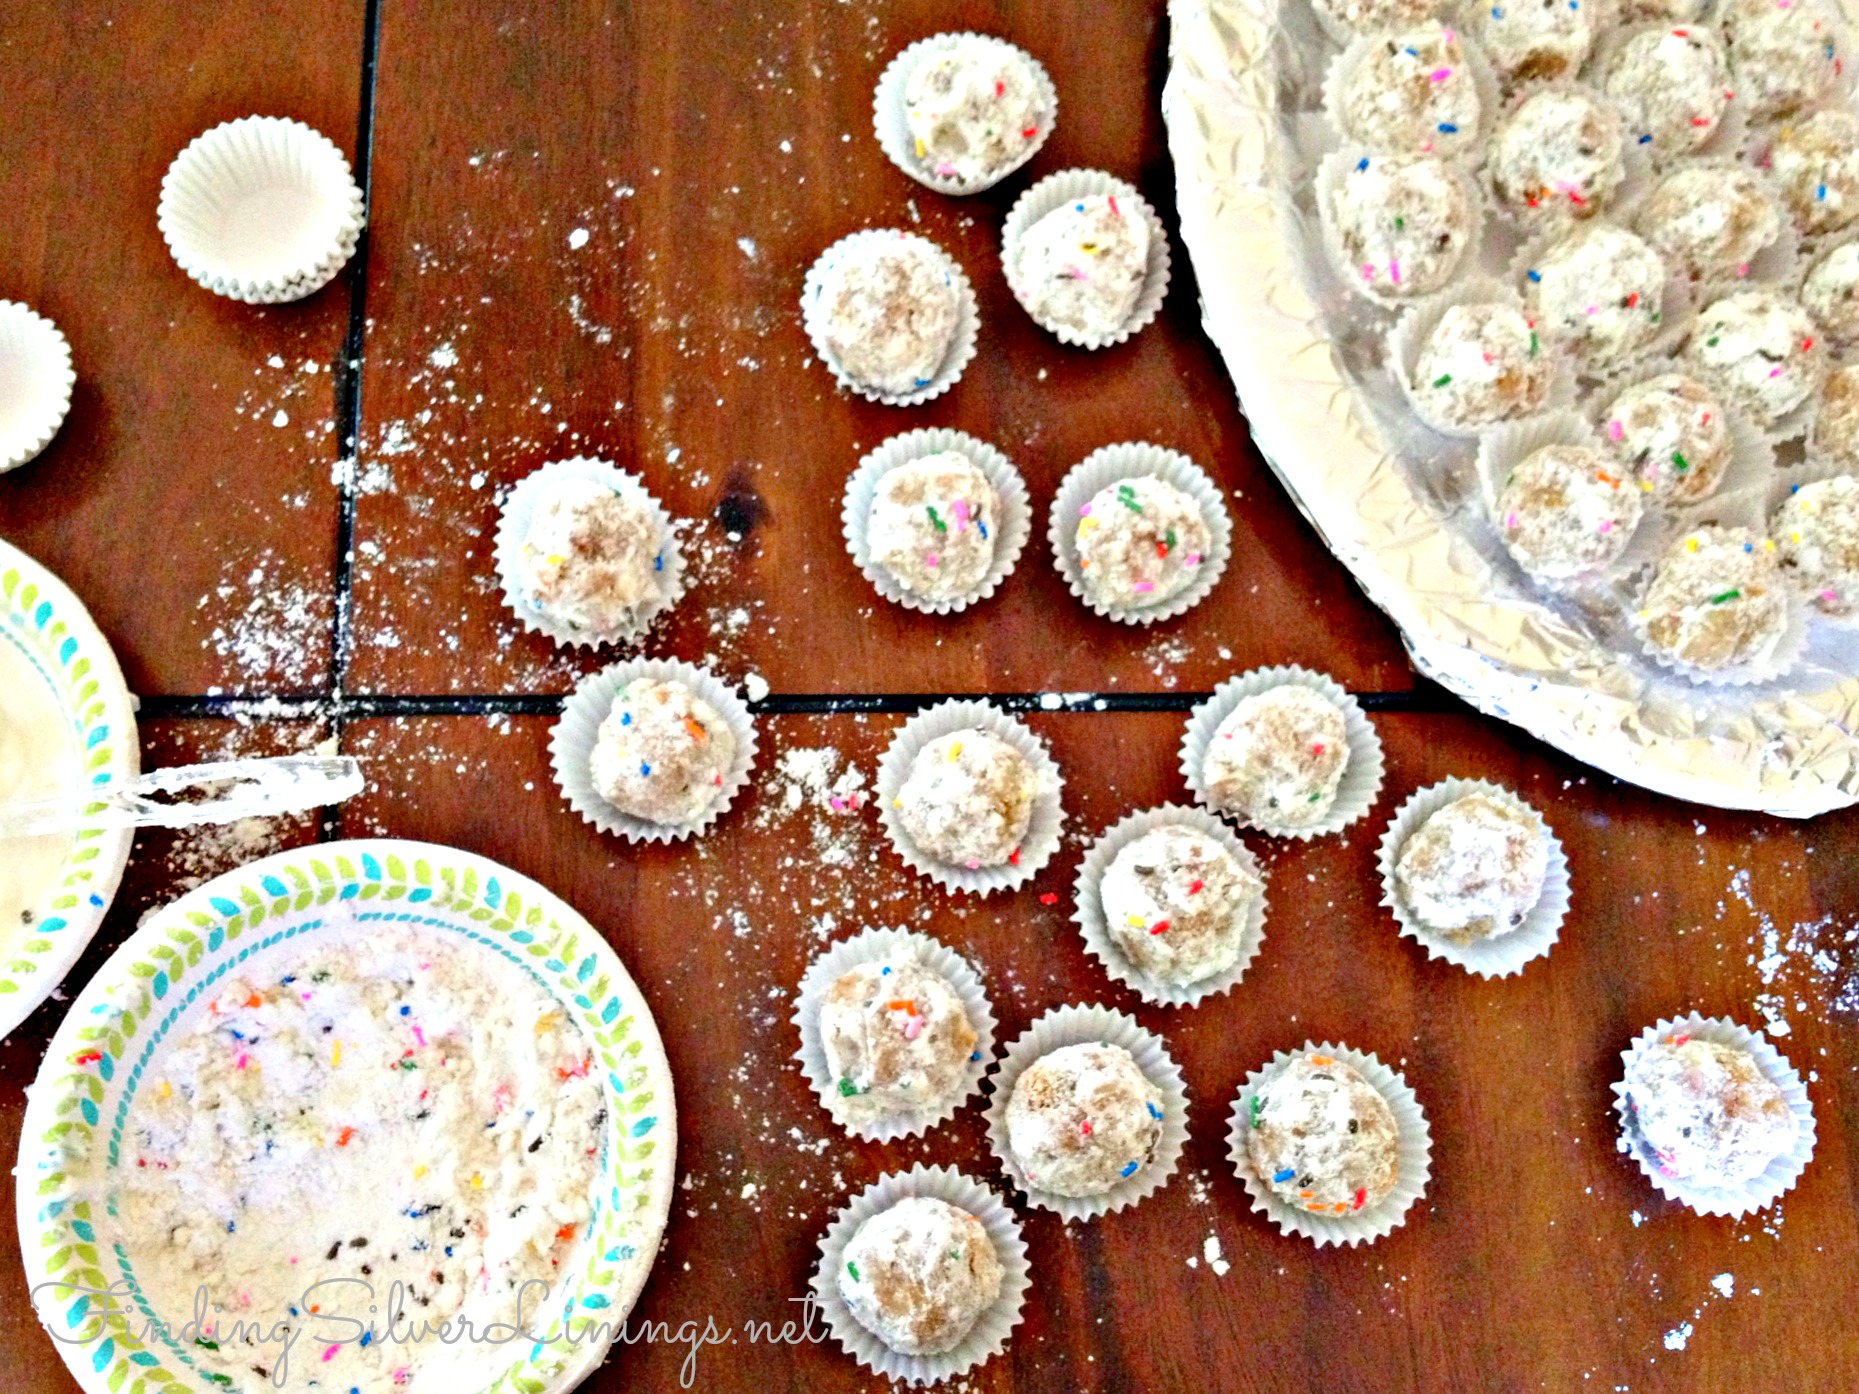 How To Make Cake Balls Without Frosting Finding Silver Linings